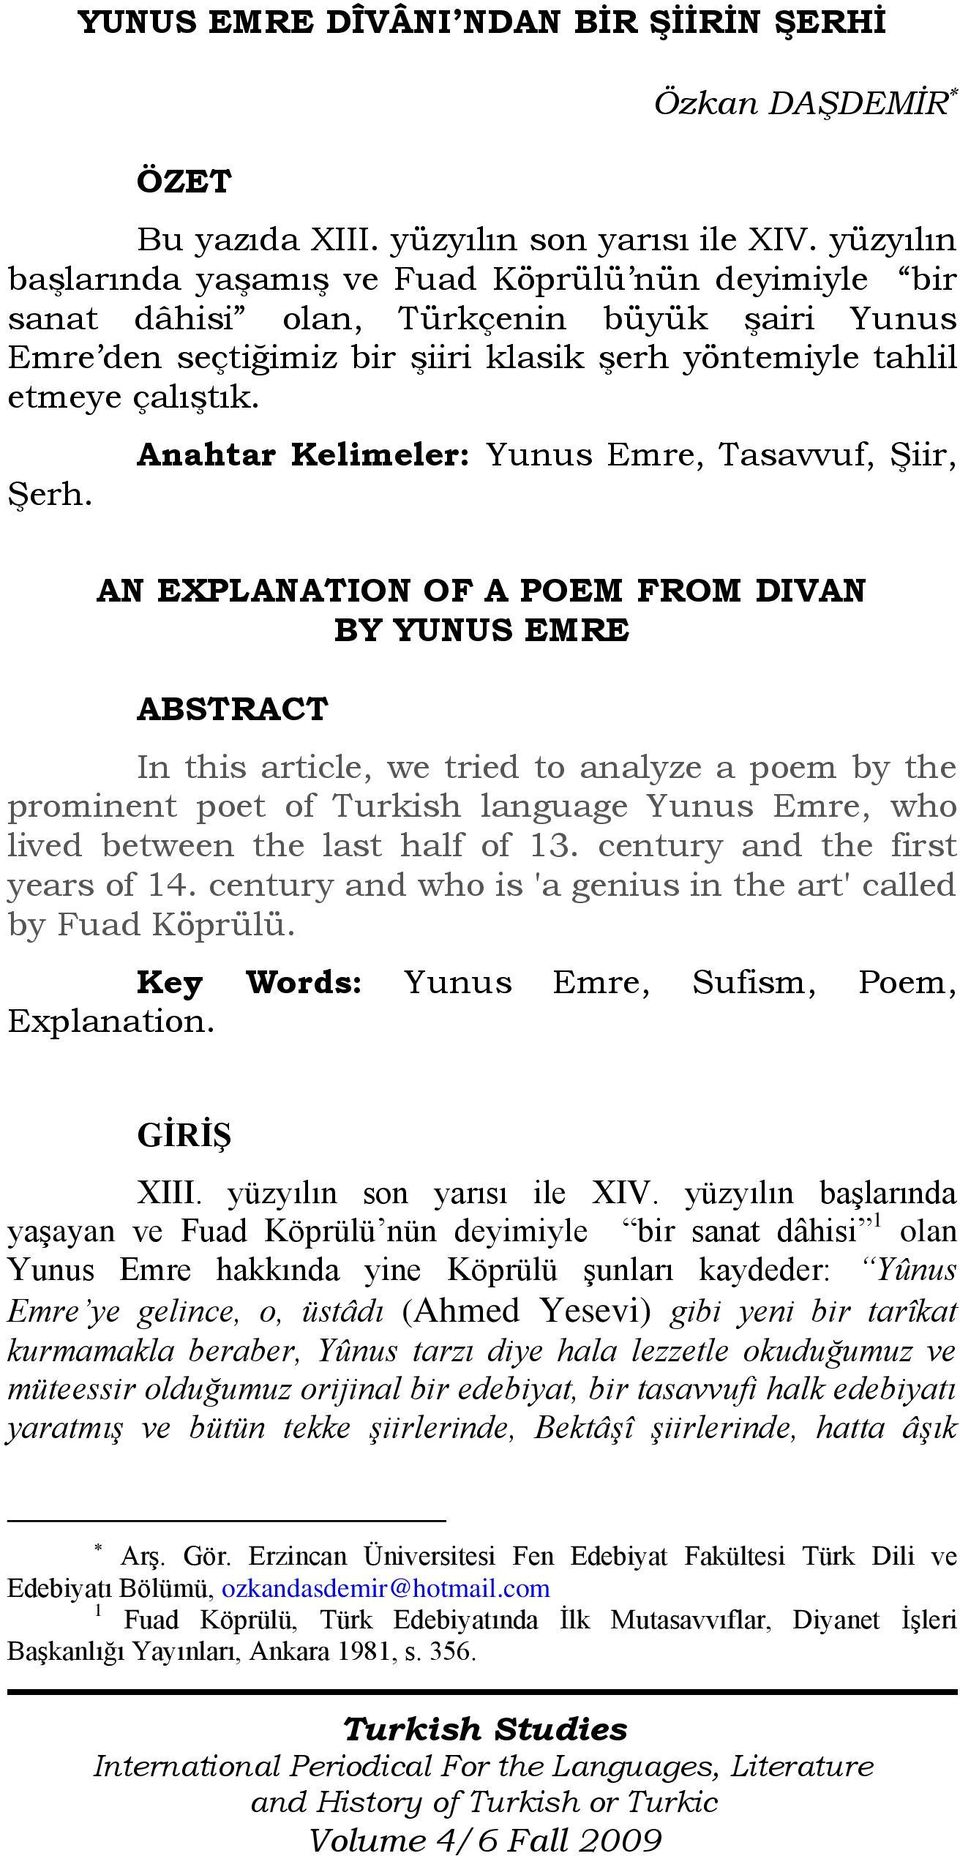 Anahtar Kelimeler: Yunus Emre, Tasavvuf, Şiir, AN EXPLANATION OF A POEM FROM DIVAN BY YUNUS EMRE ABSTRACT In this article, we tried to analyze a poem by the prominent poet of Turkish language Yunus